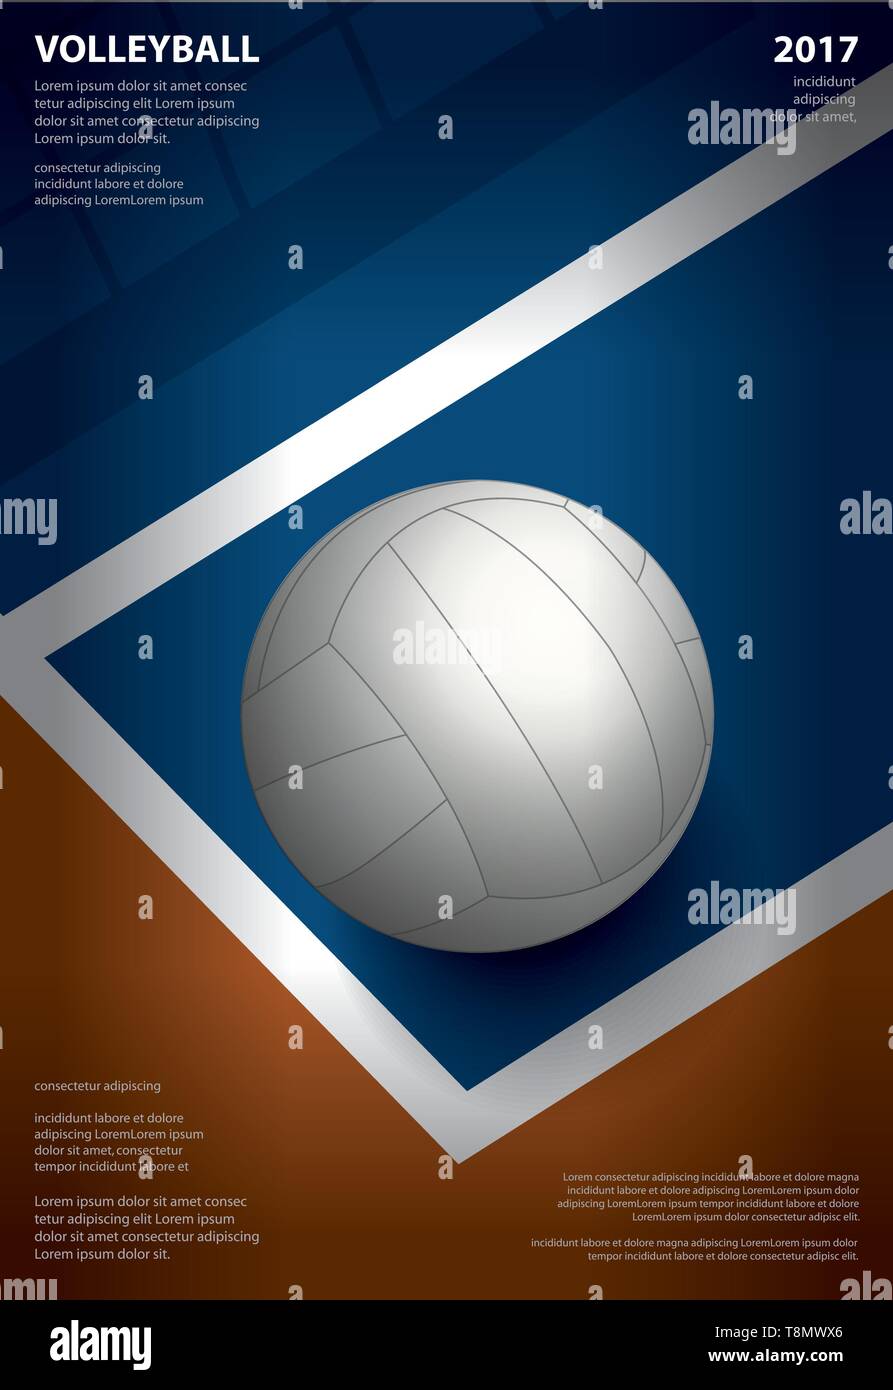 Volleyball Tournament Poster  Template Design Vector Illustration Stock Vector